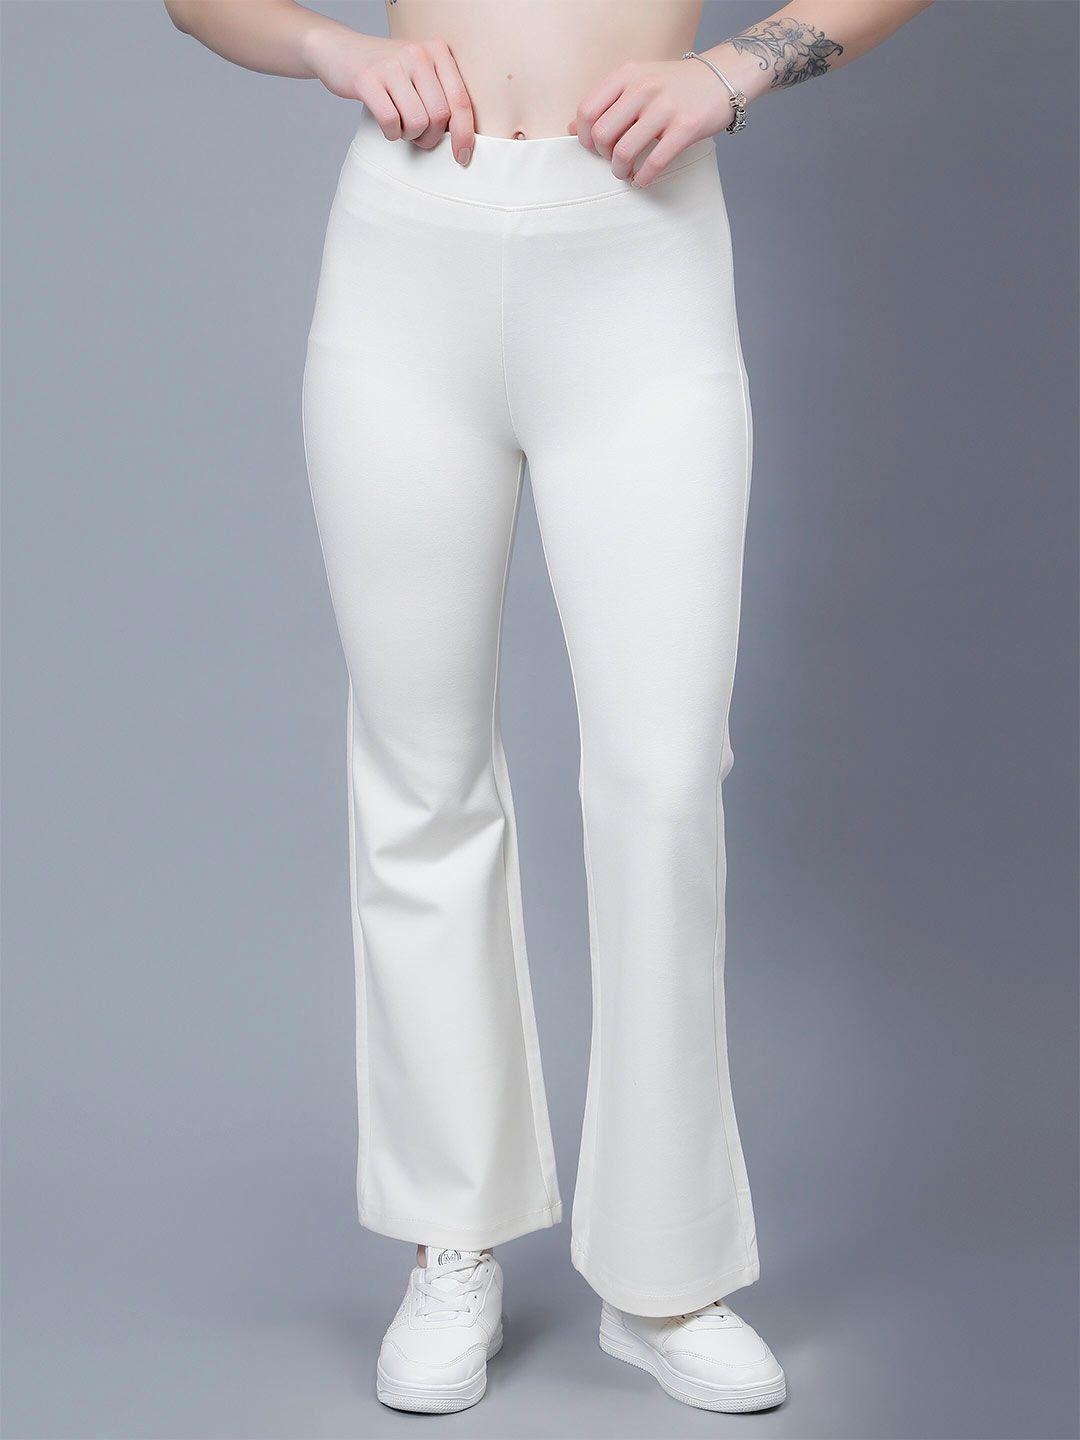 albion-women-relaxed-fit-cotton-bootcut-jeggings